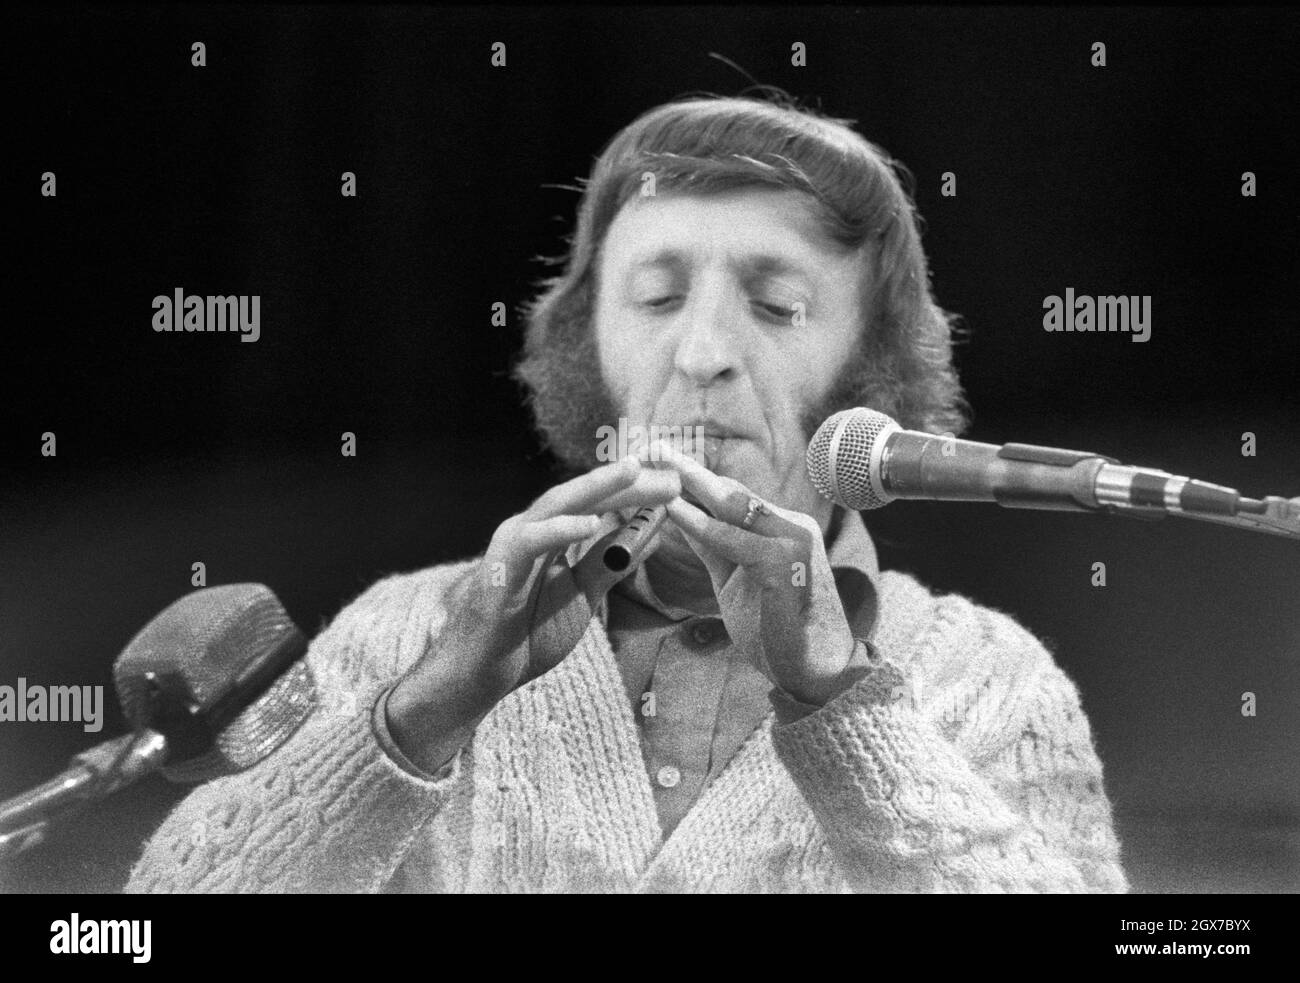 Irish musician and composer Paddy Moloney performing with The Chieftains at the July Wakes folk festival in Chorley, Lancashire, England on 25 July 1976. Stock Photo